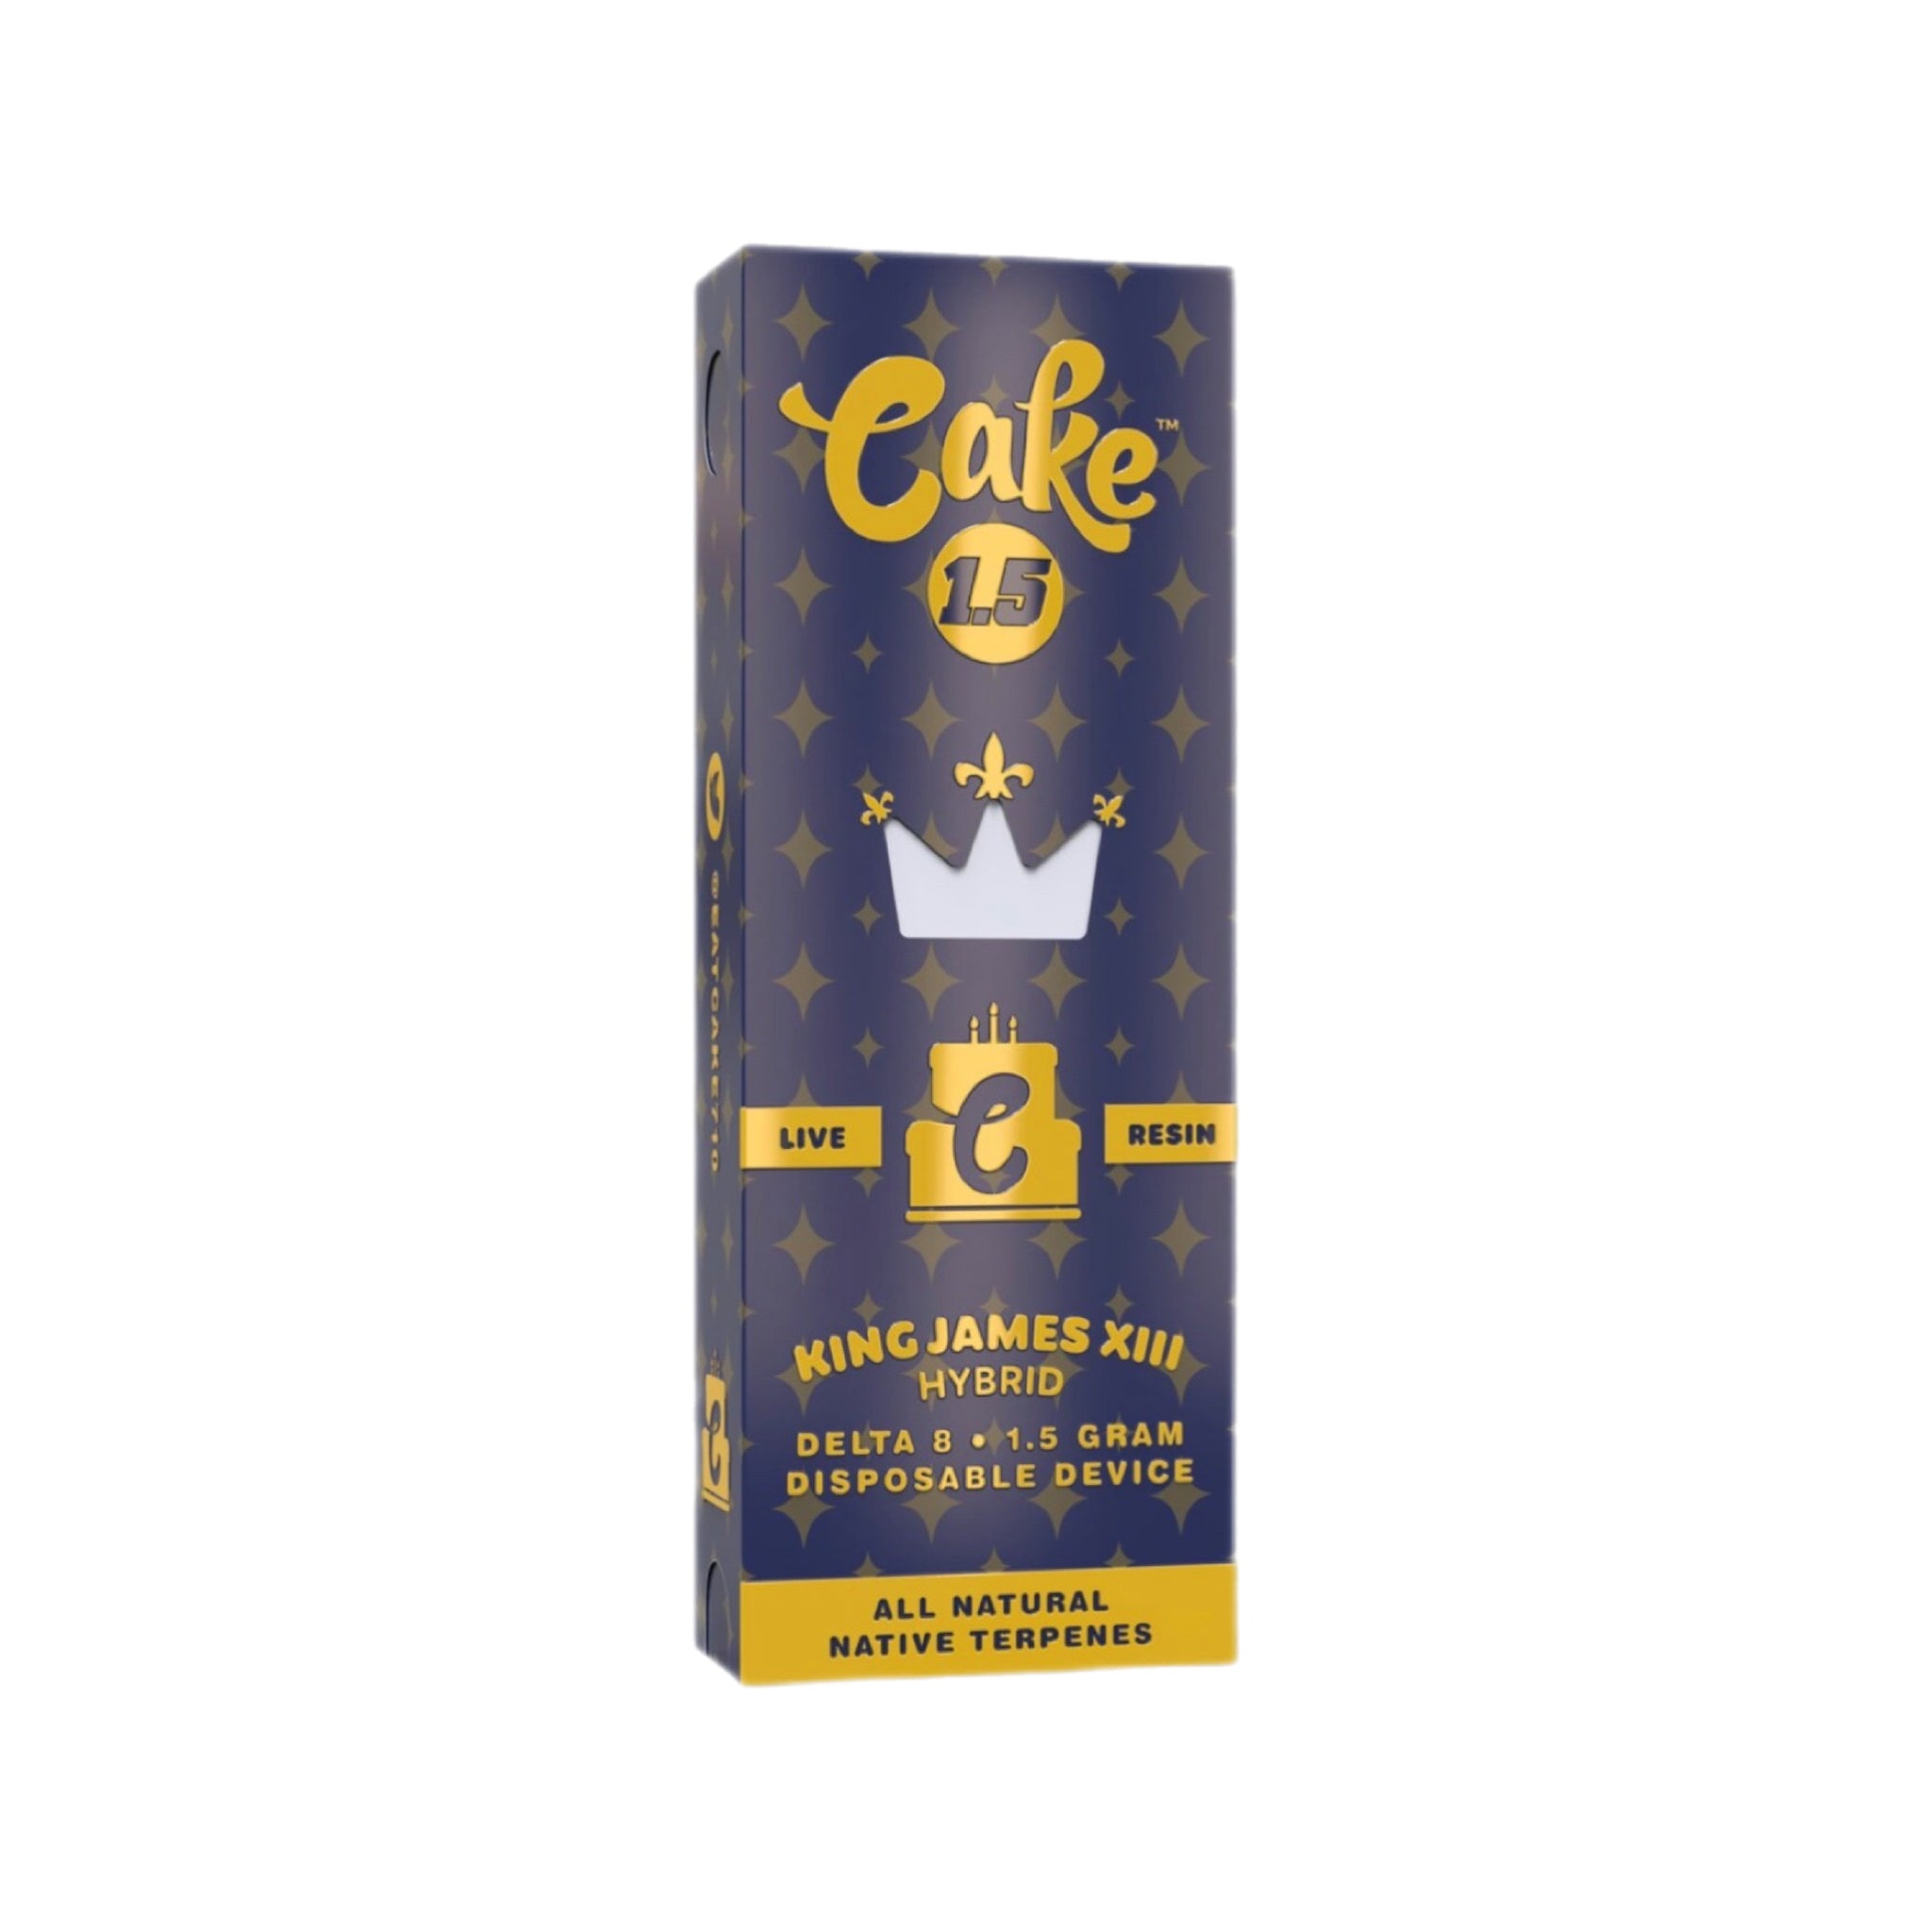 Cake - Delta-8 THC Live Resin Disposable 1.5 grams on Sale at CBD Direct Solutions. Buy Now!